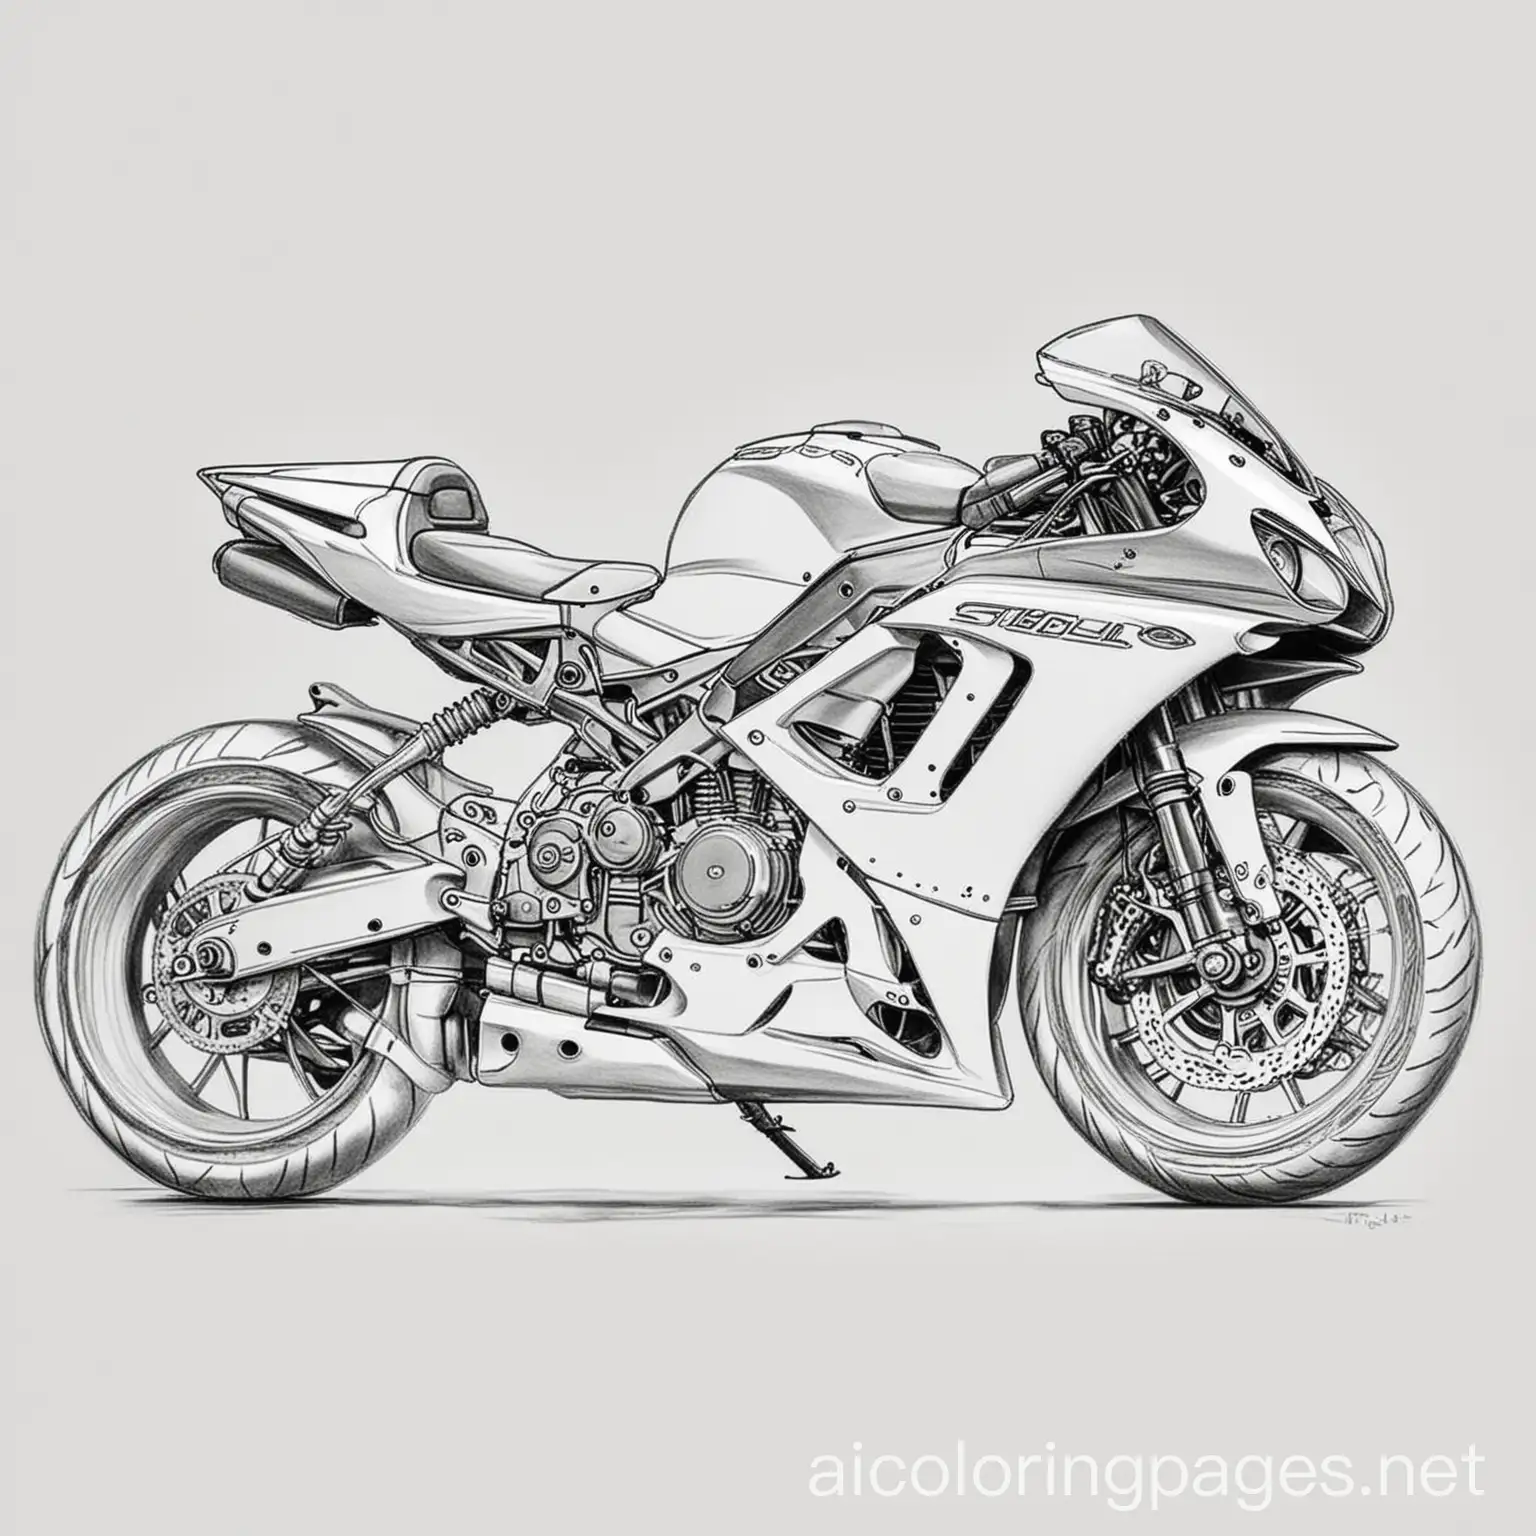 motorcycle , Coloring Page, black and white, line art, white background, Simplicity, Ample White Space. The background of the coloring page is plain white to make it easy for young children to color within the lines. The outlines of all the subjects are easy to distinguish, making it simple for kids to color without too much difficulty